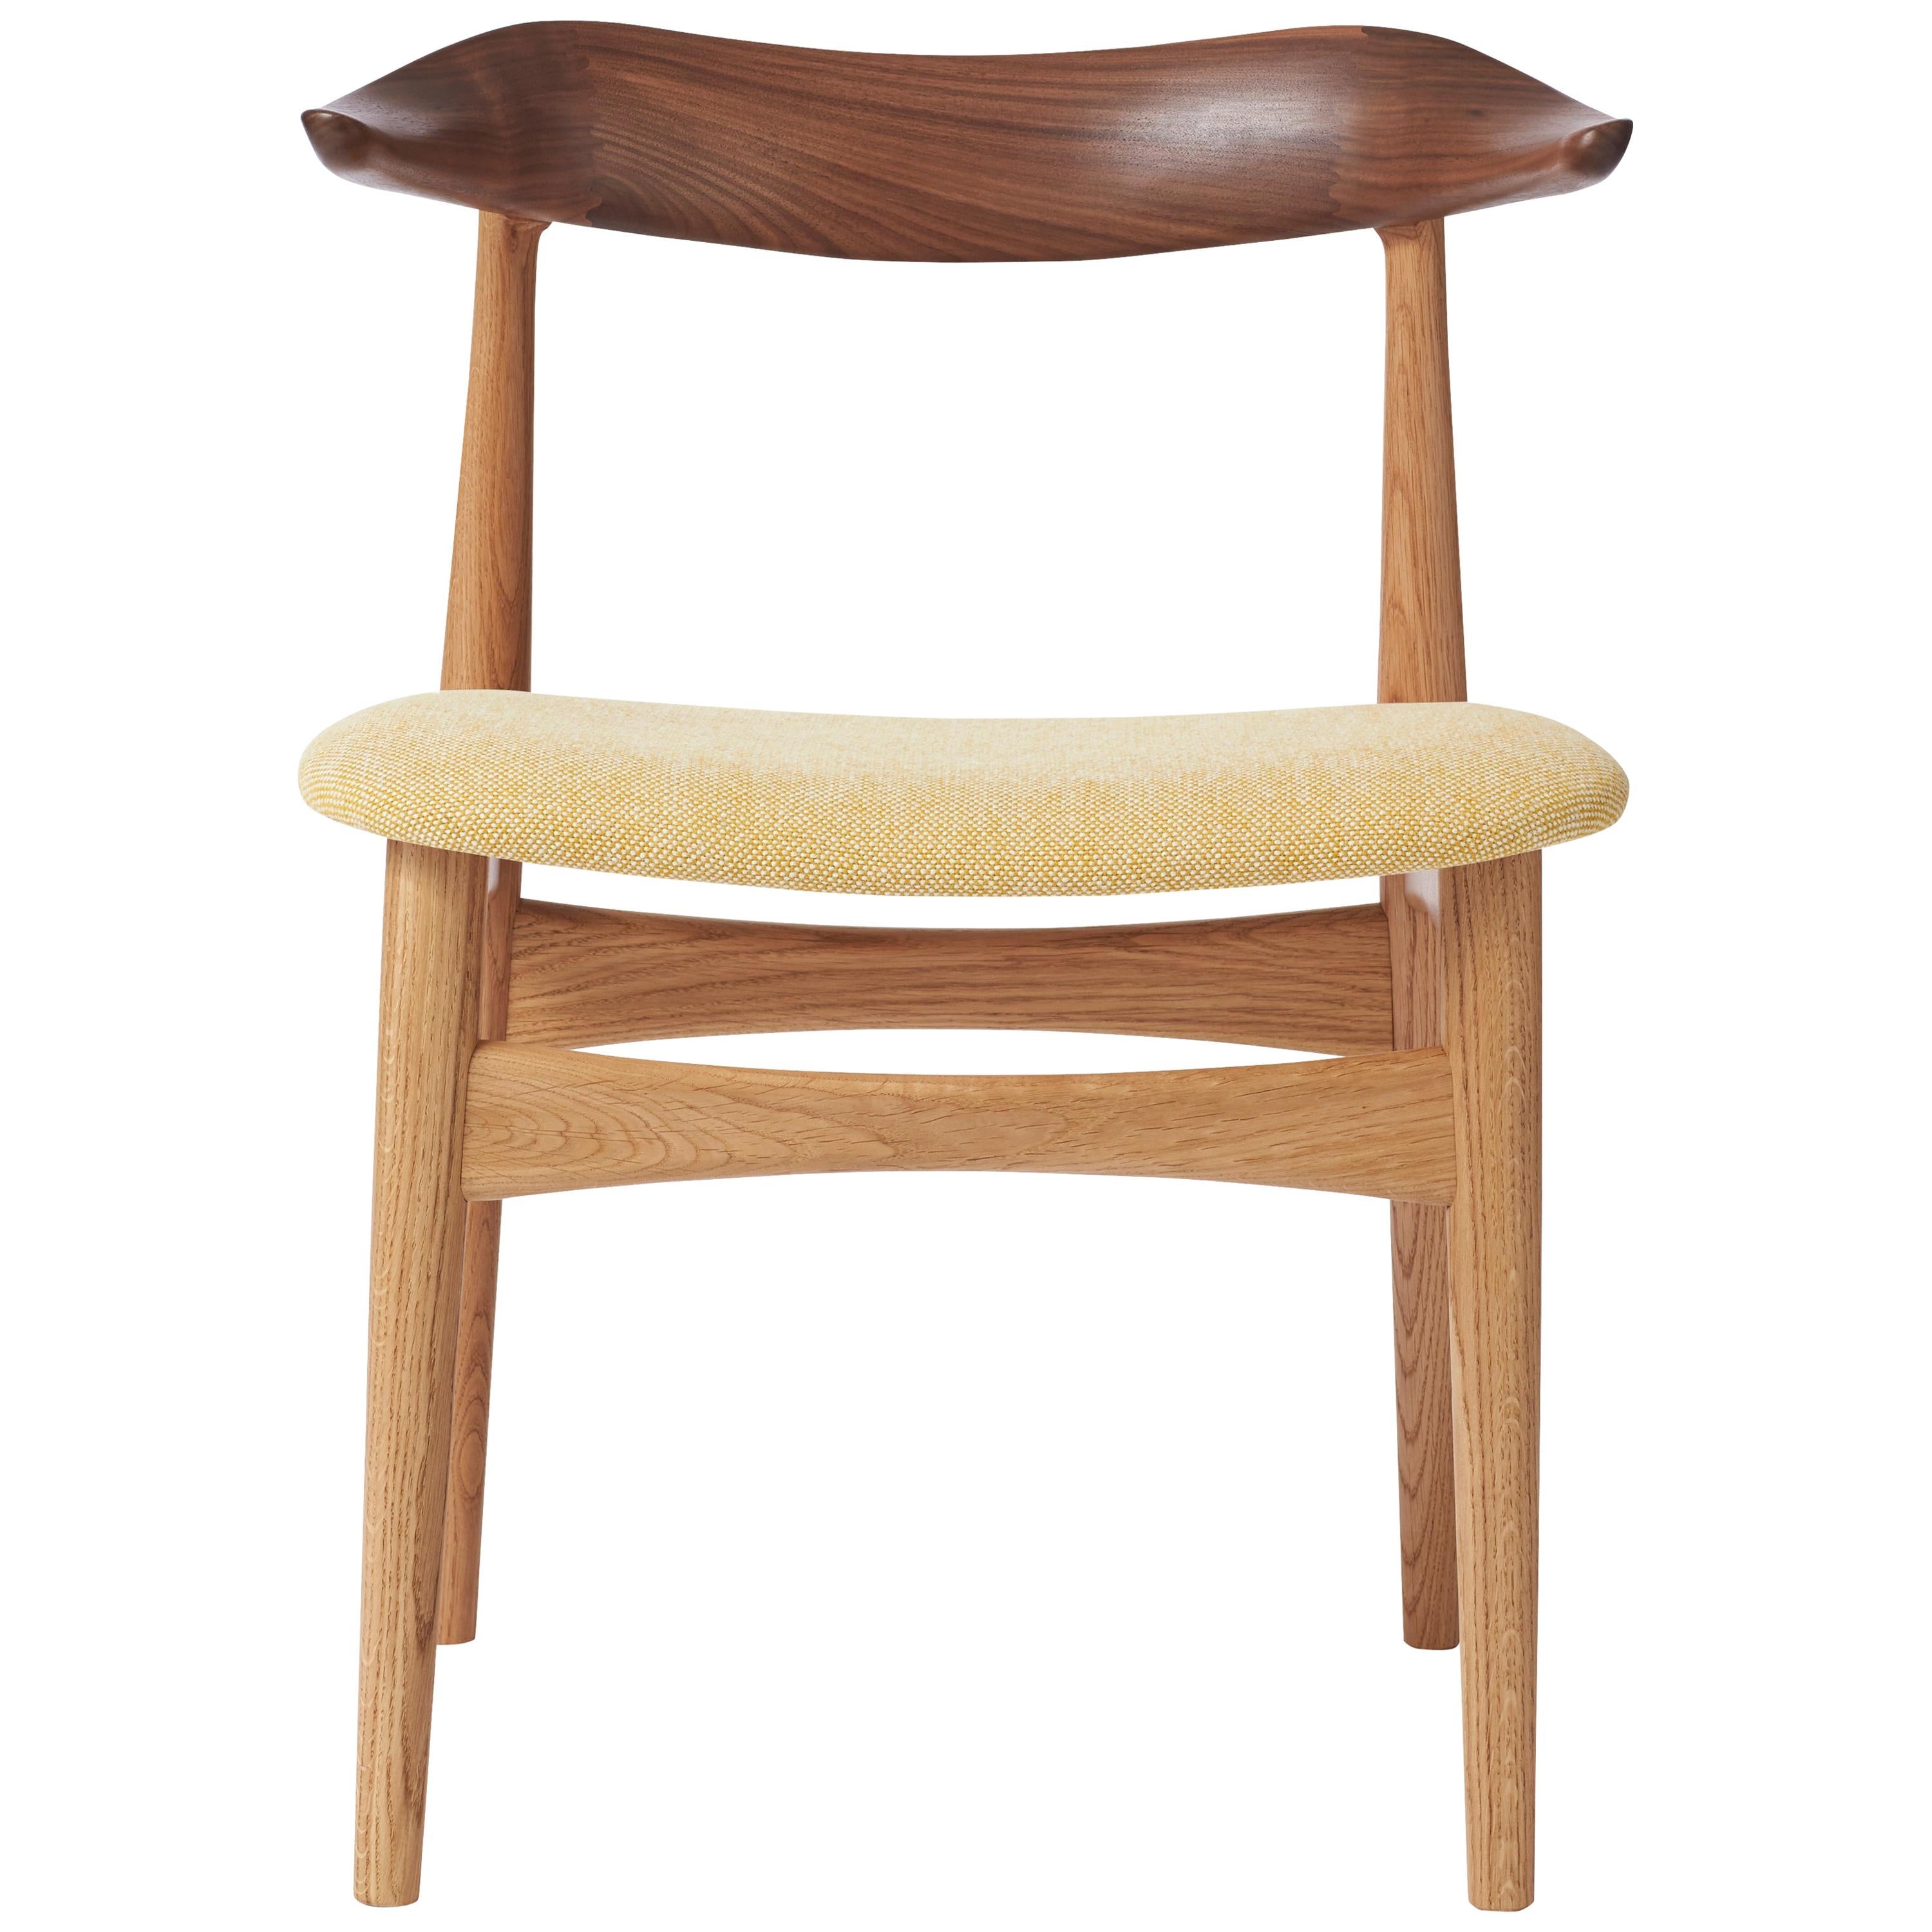 For Sale: Yellow (Halling 407) Cow Horn Mixed Wood Chair, by Knud Færch from Warm Nordic